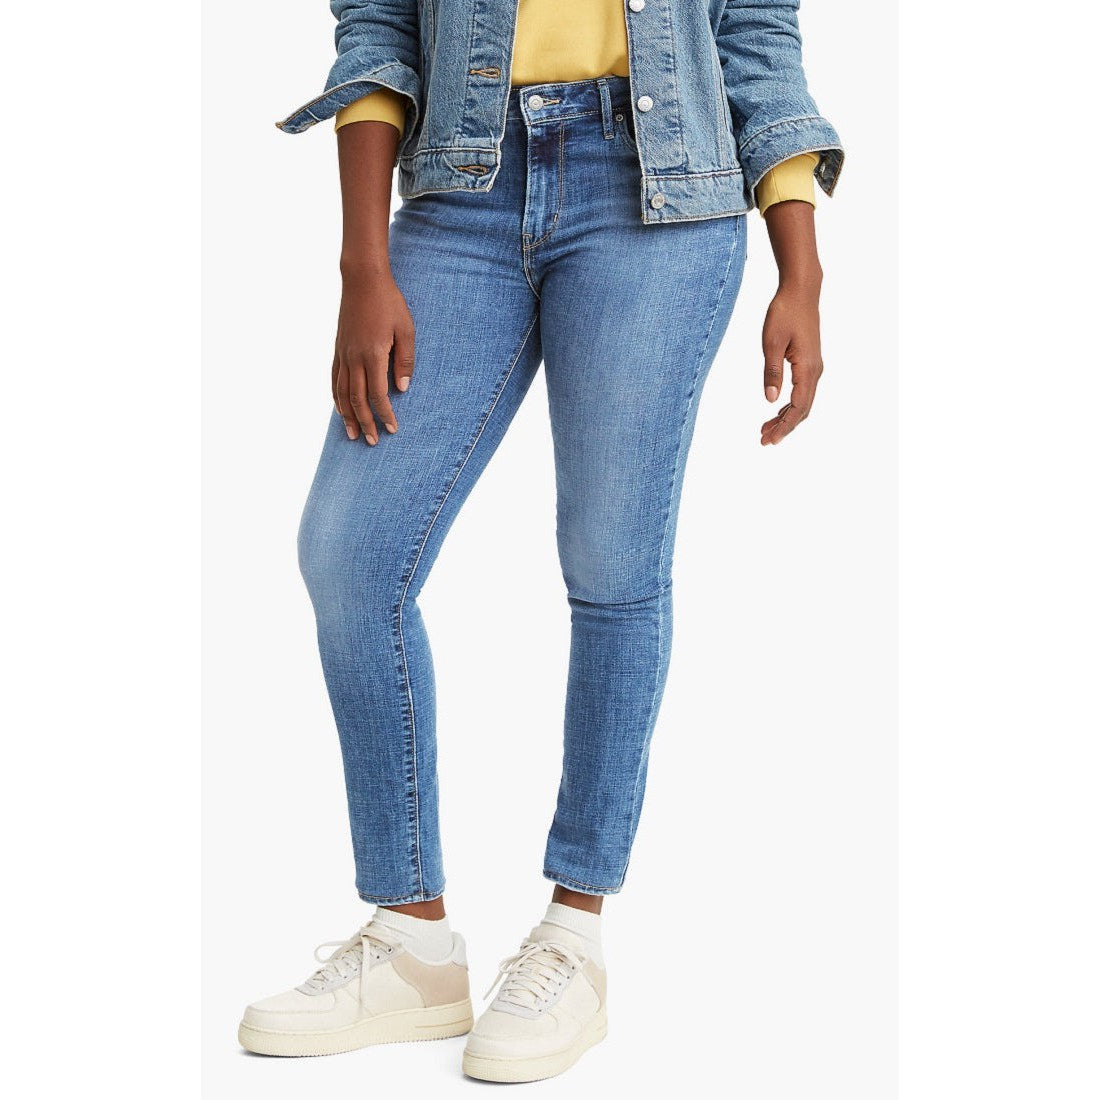 Levi Women's 721 High Rise Skinny Jeans - Lapis Air (Mid Wash)